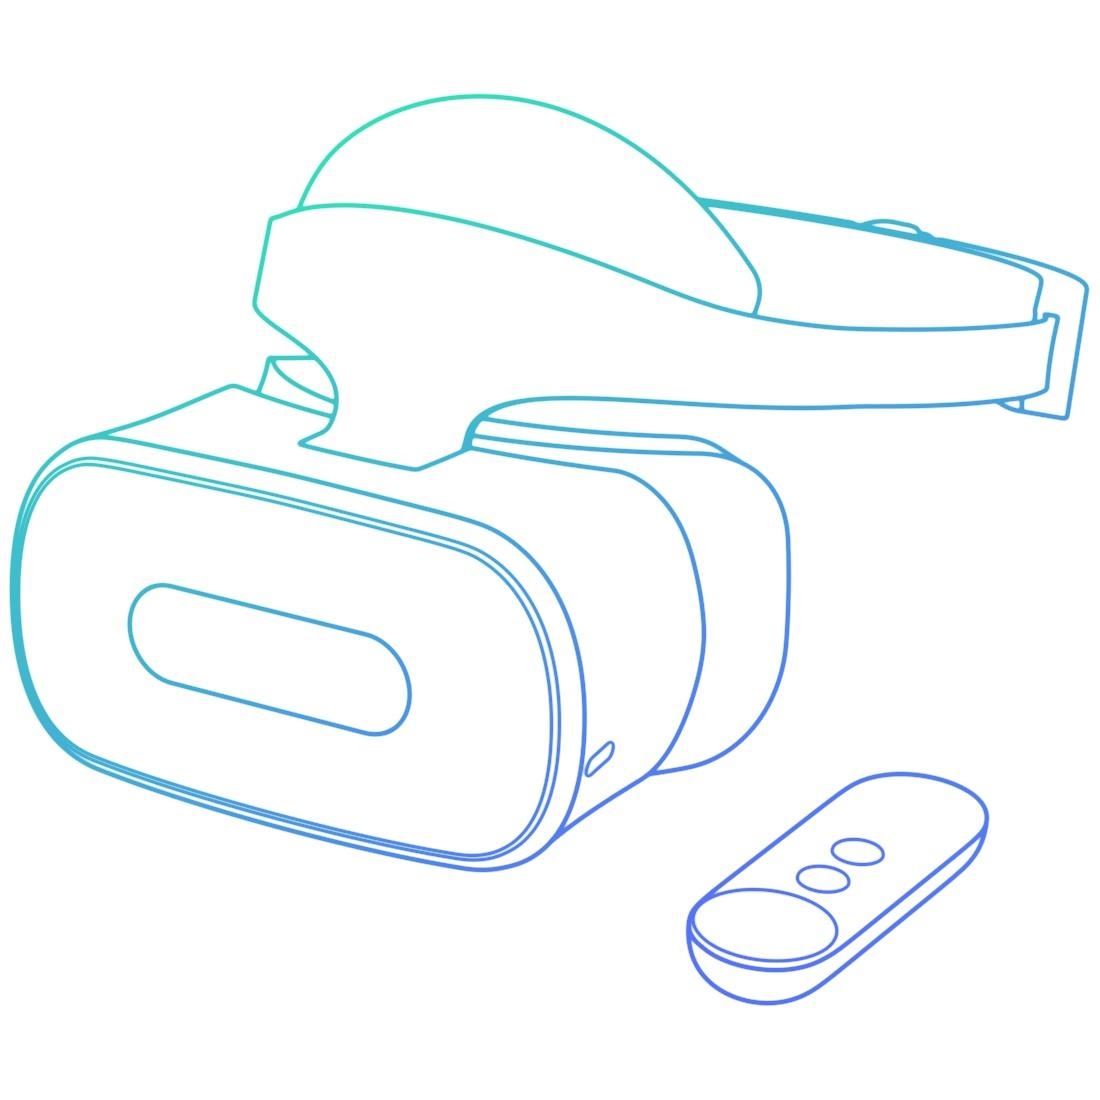 Will Google's Standalone VR Headsets Enable AR Experiences?